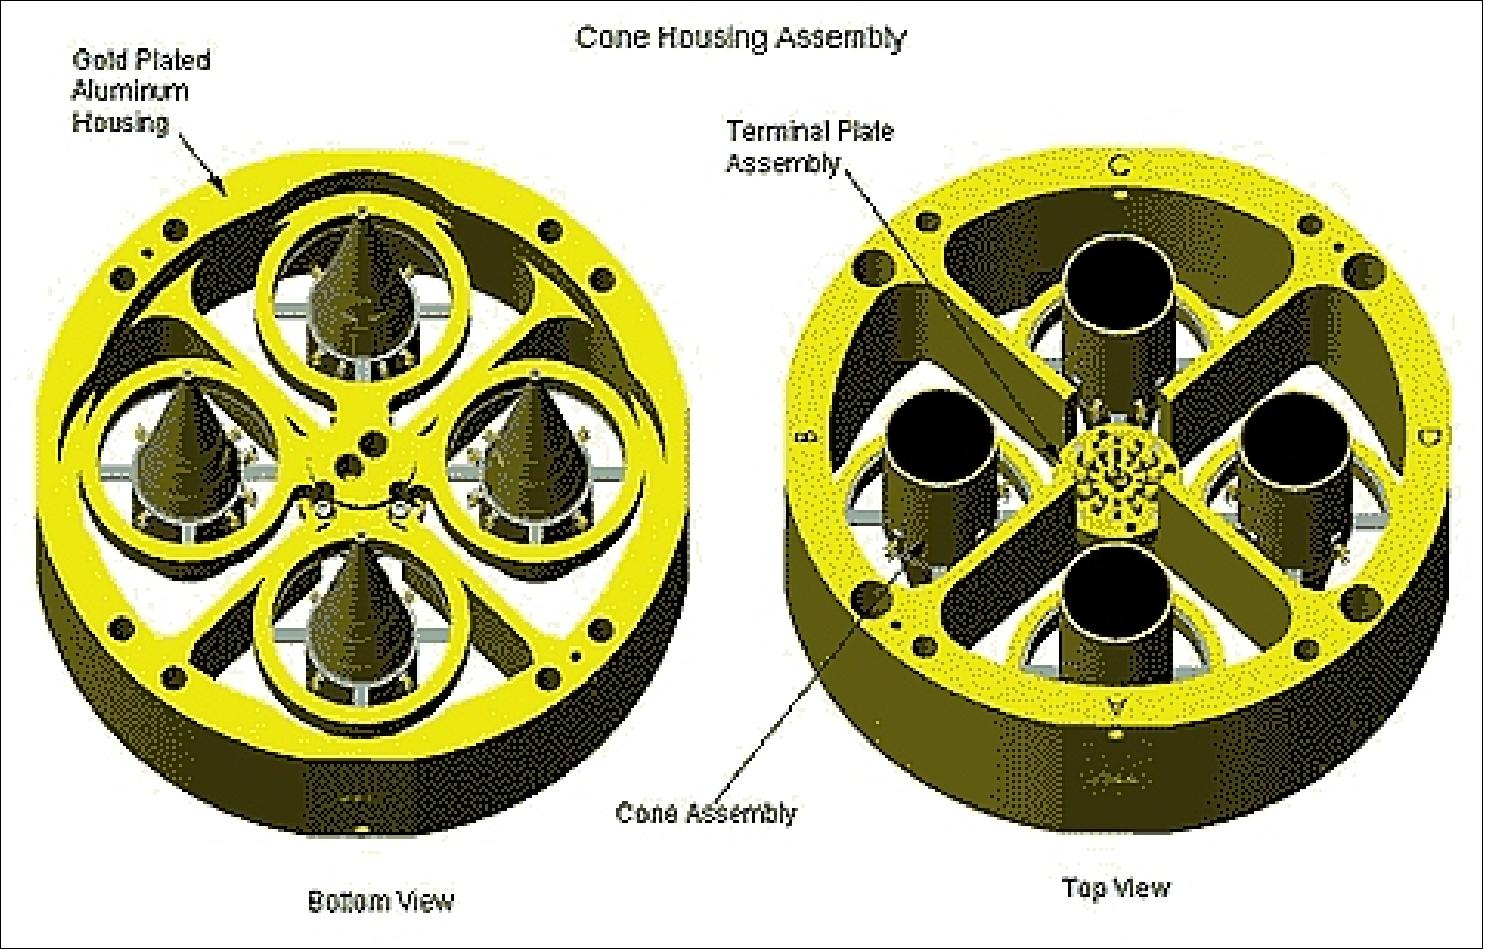 Figure 12: Top and bottom view of cone housing assembly (image credit: LASP)